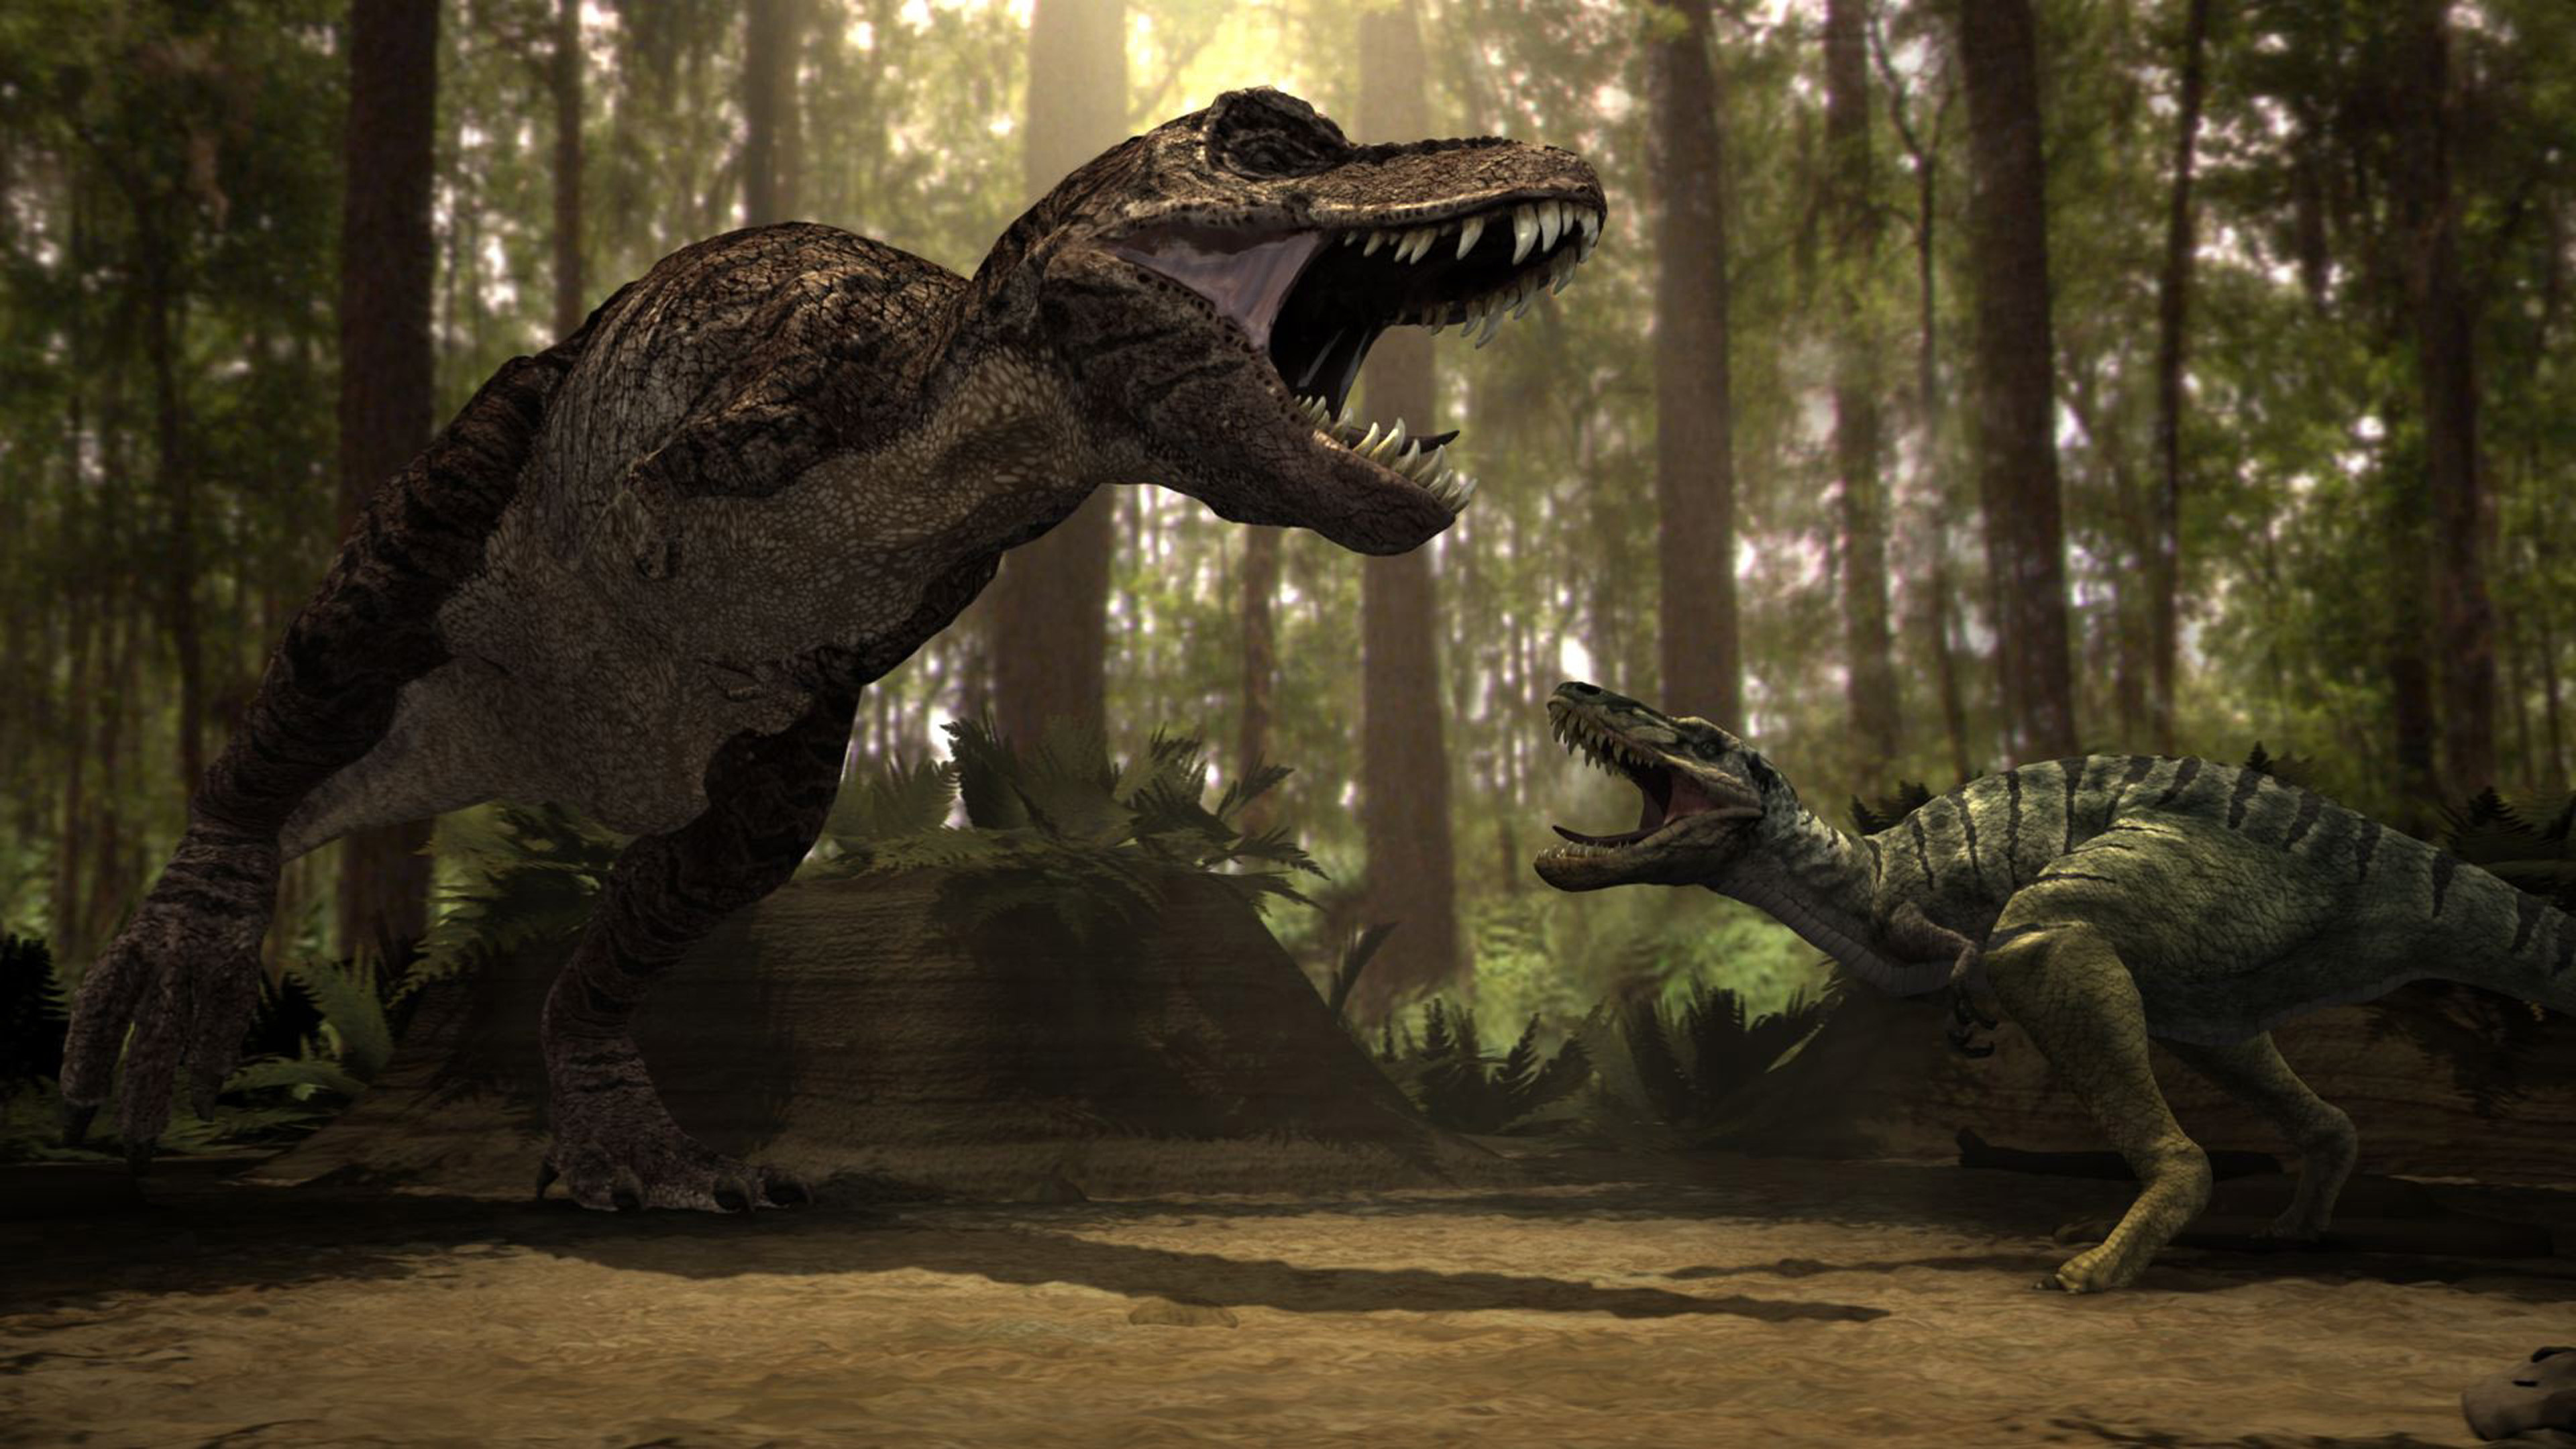 3840x2160 Dinosaurs Wallpapers Hd 0.